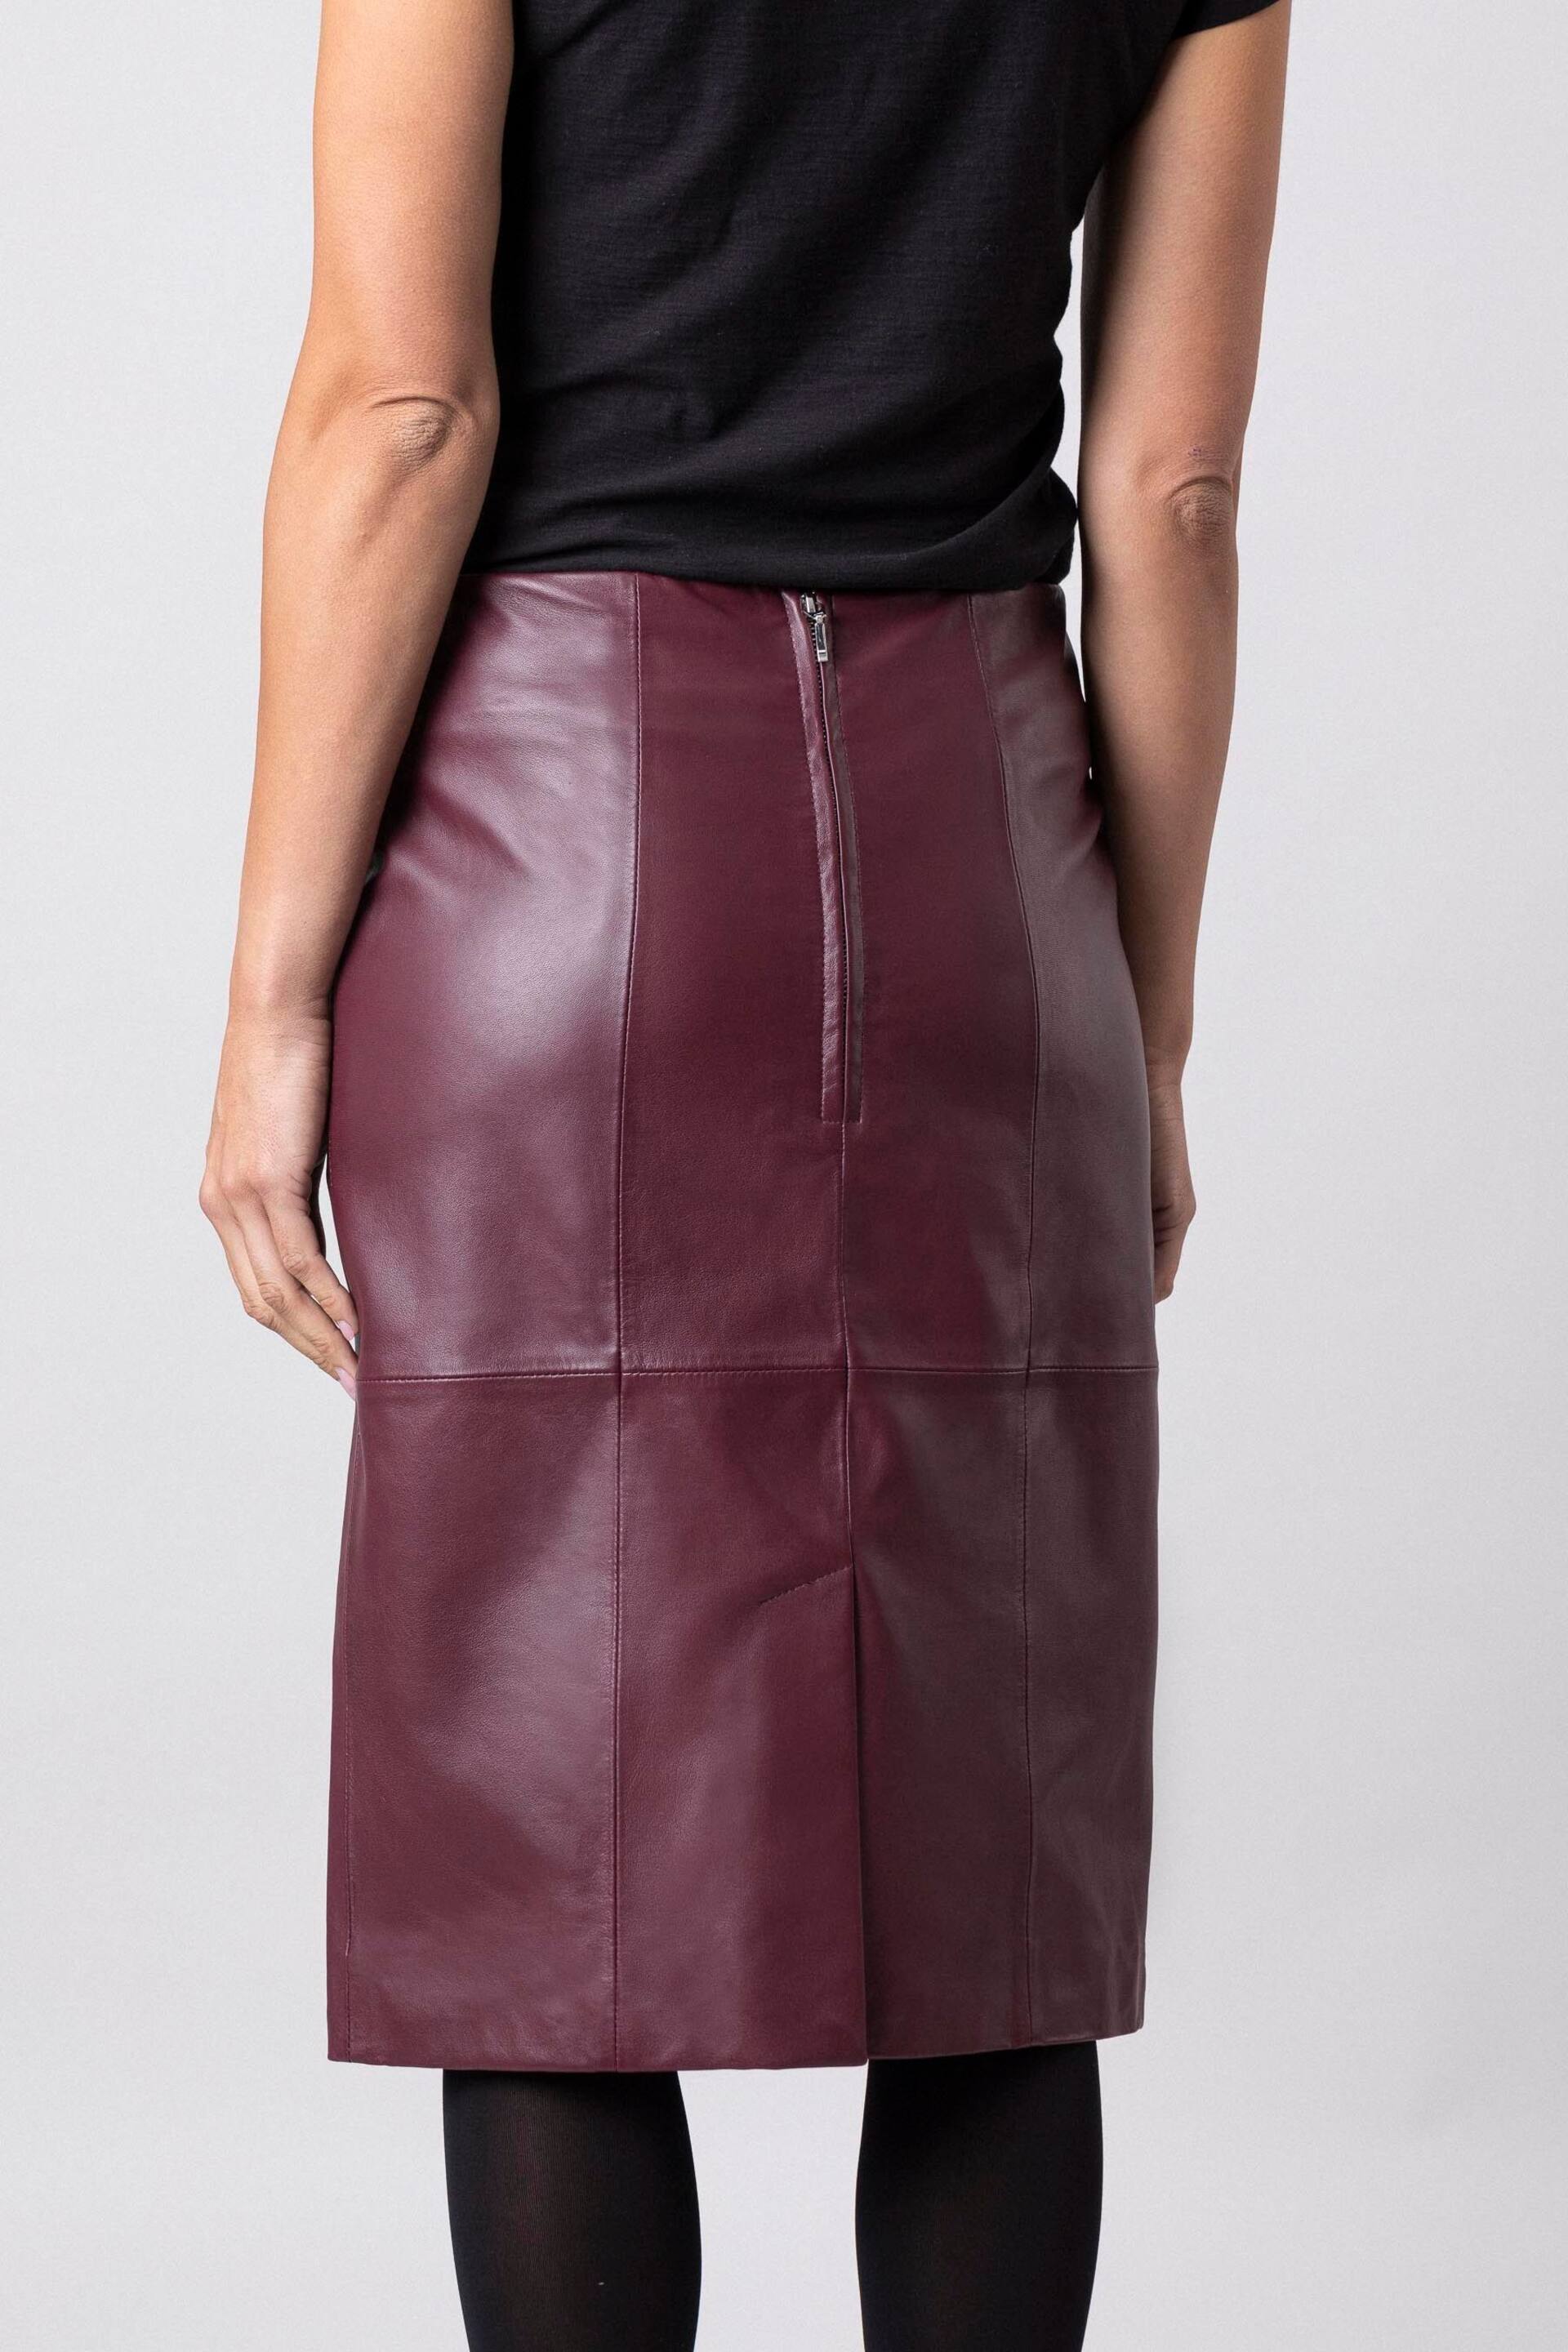 Lakeland Leather High Waisted Leather Pencil Skirt - Image 4 of 8